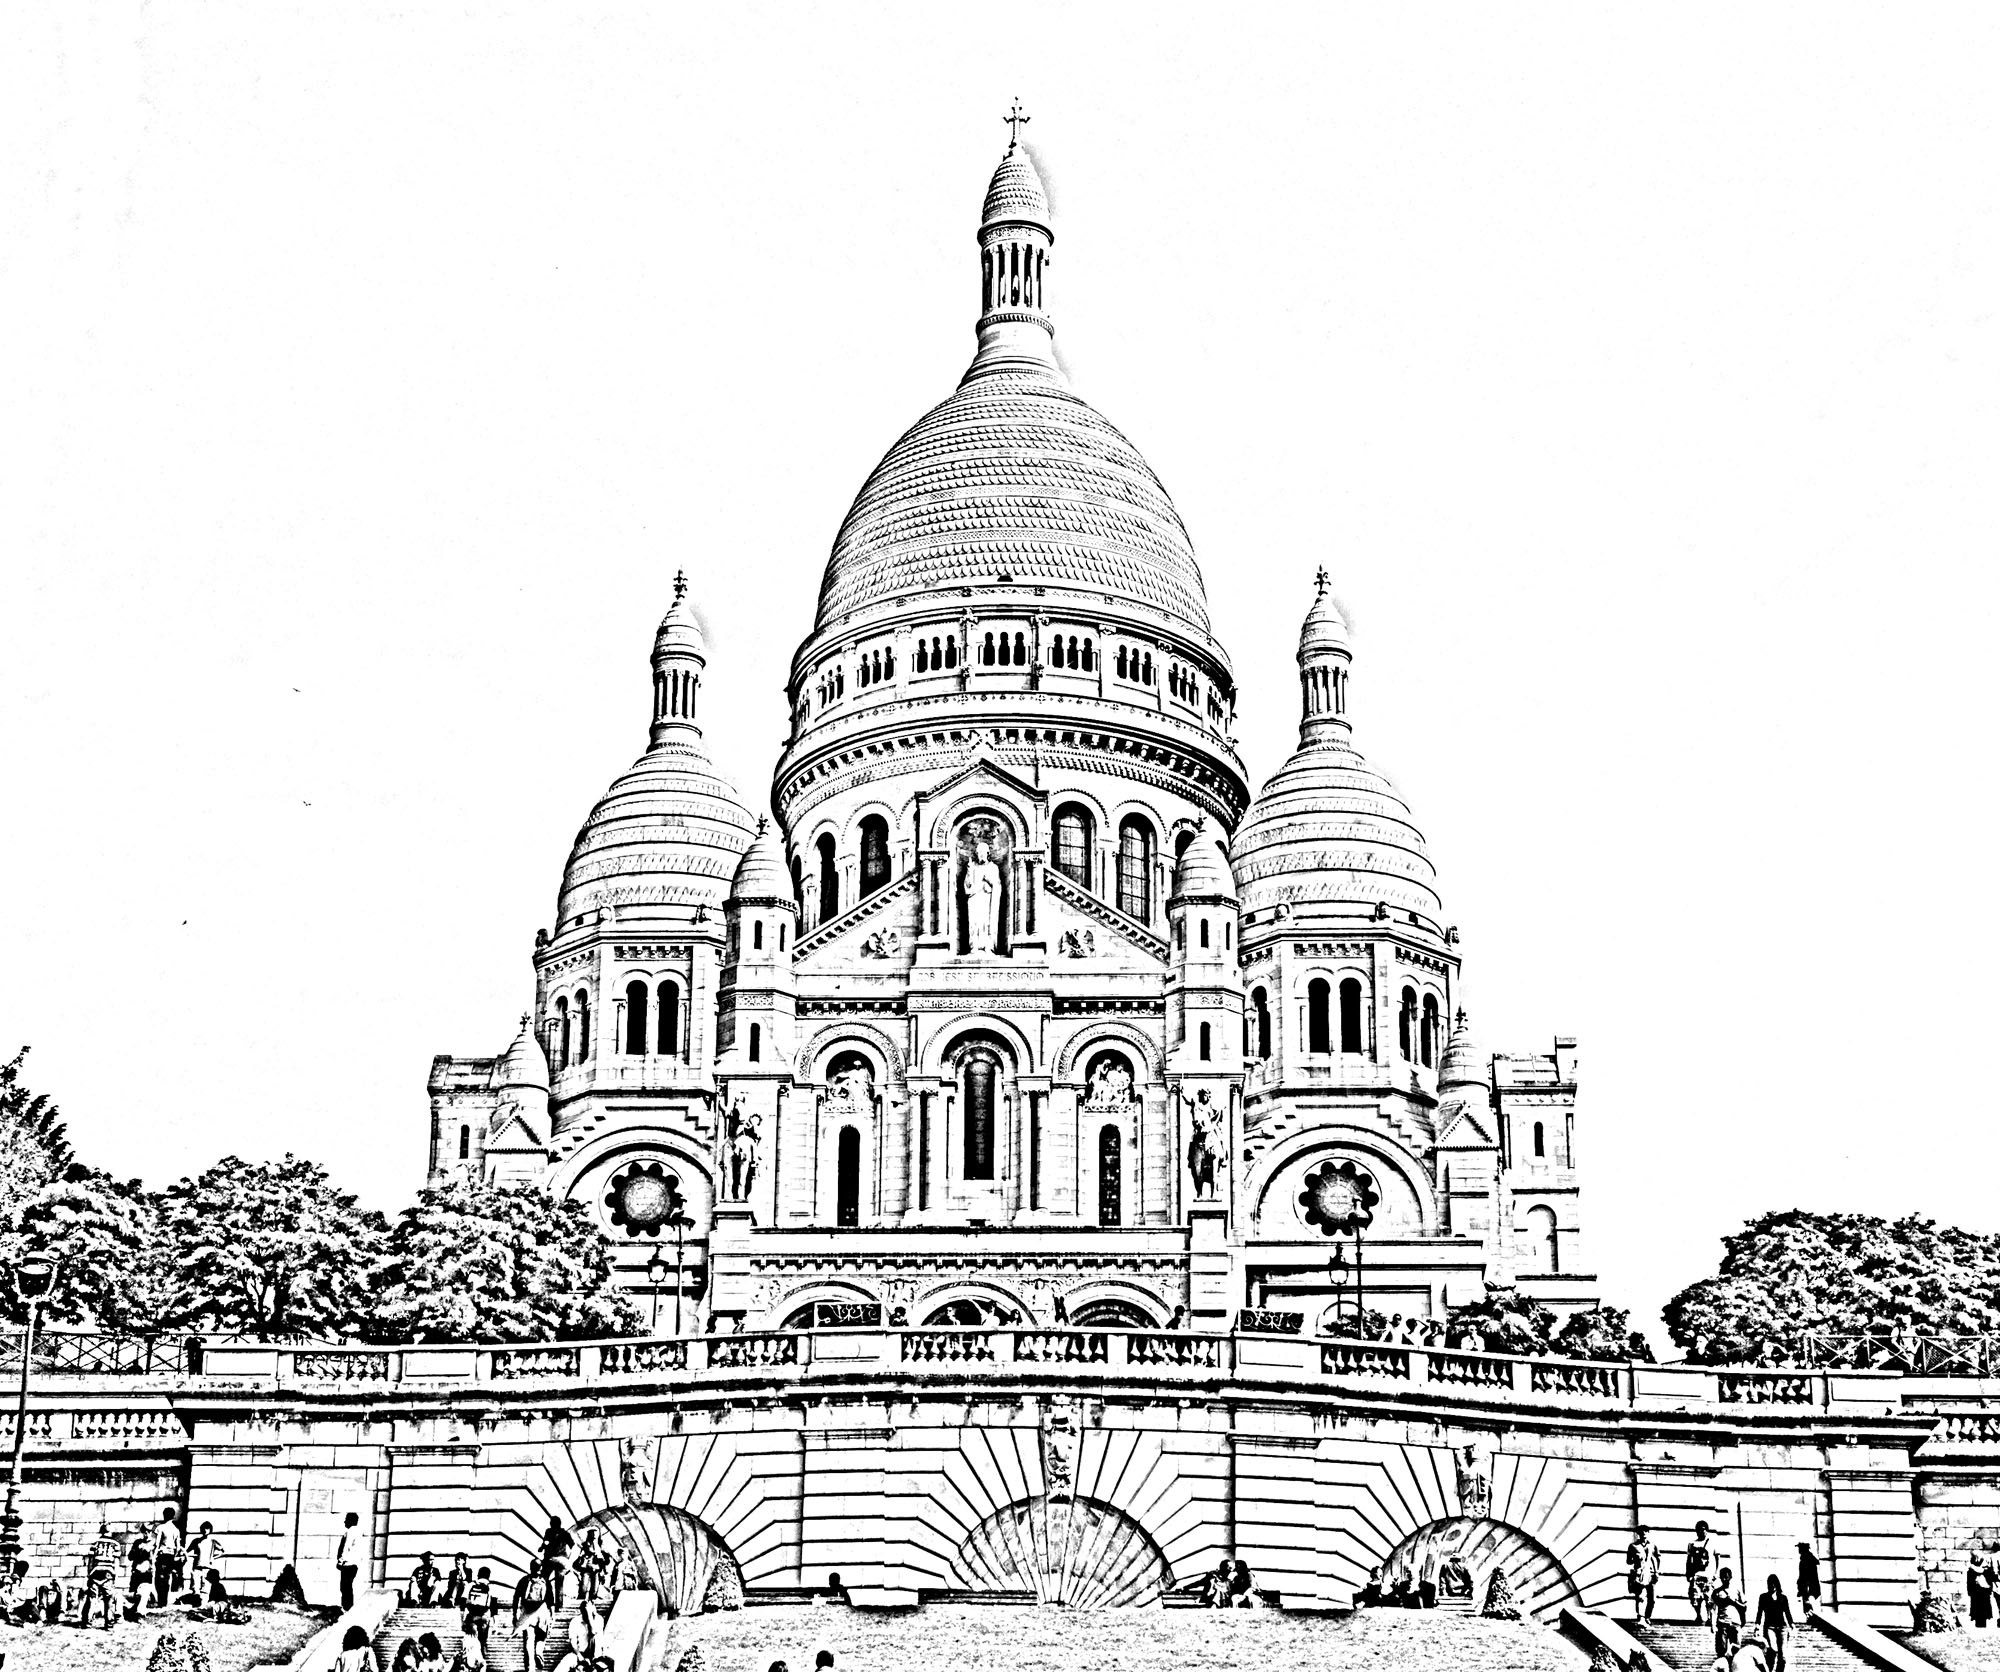 The Basilica of the Sacred Heart in Paris, transformed into a beautiful coloring page